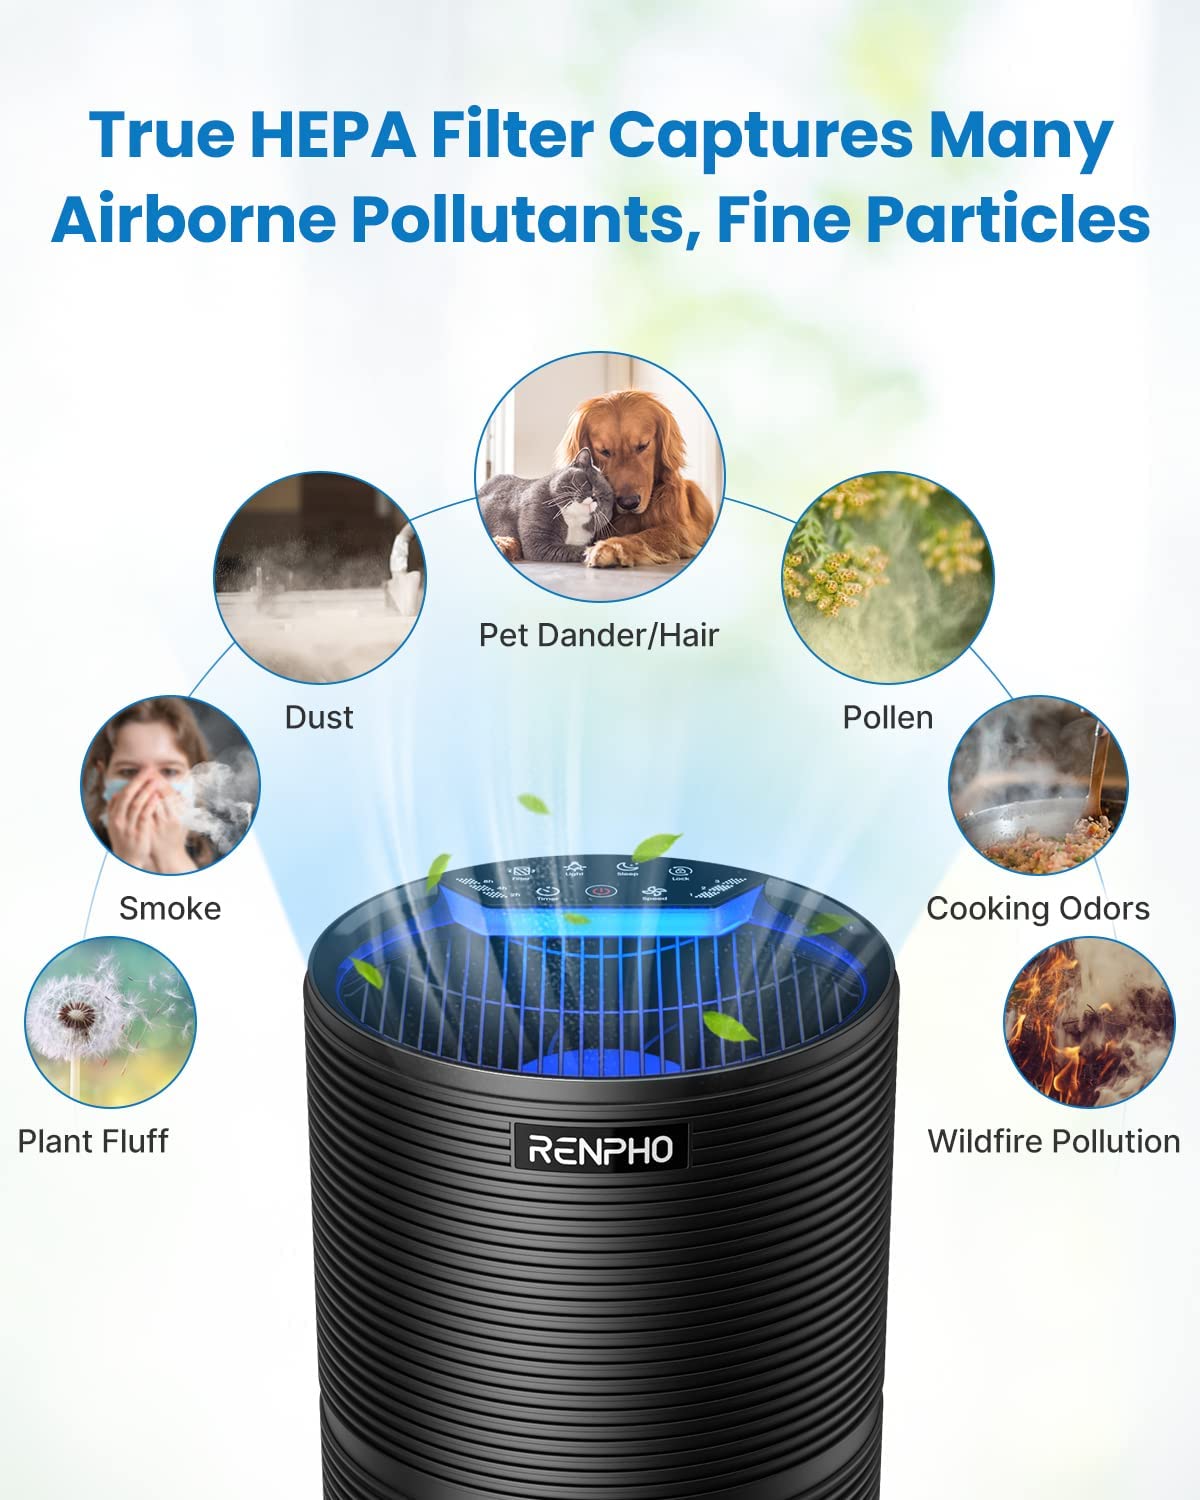 RENPHO HEPA Air Purifier for Home Large Room up to 600 Sq.ft, H13 True HEPA Filter Air Cleaner for Pet Hair, Allergies, 99.97% Smokers, Odors, Dust, Pollen, Odor Eliminators for Bedroom - image 5 of 8